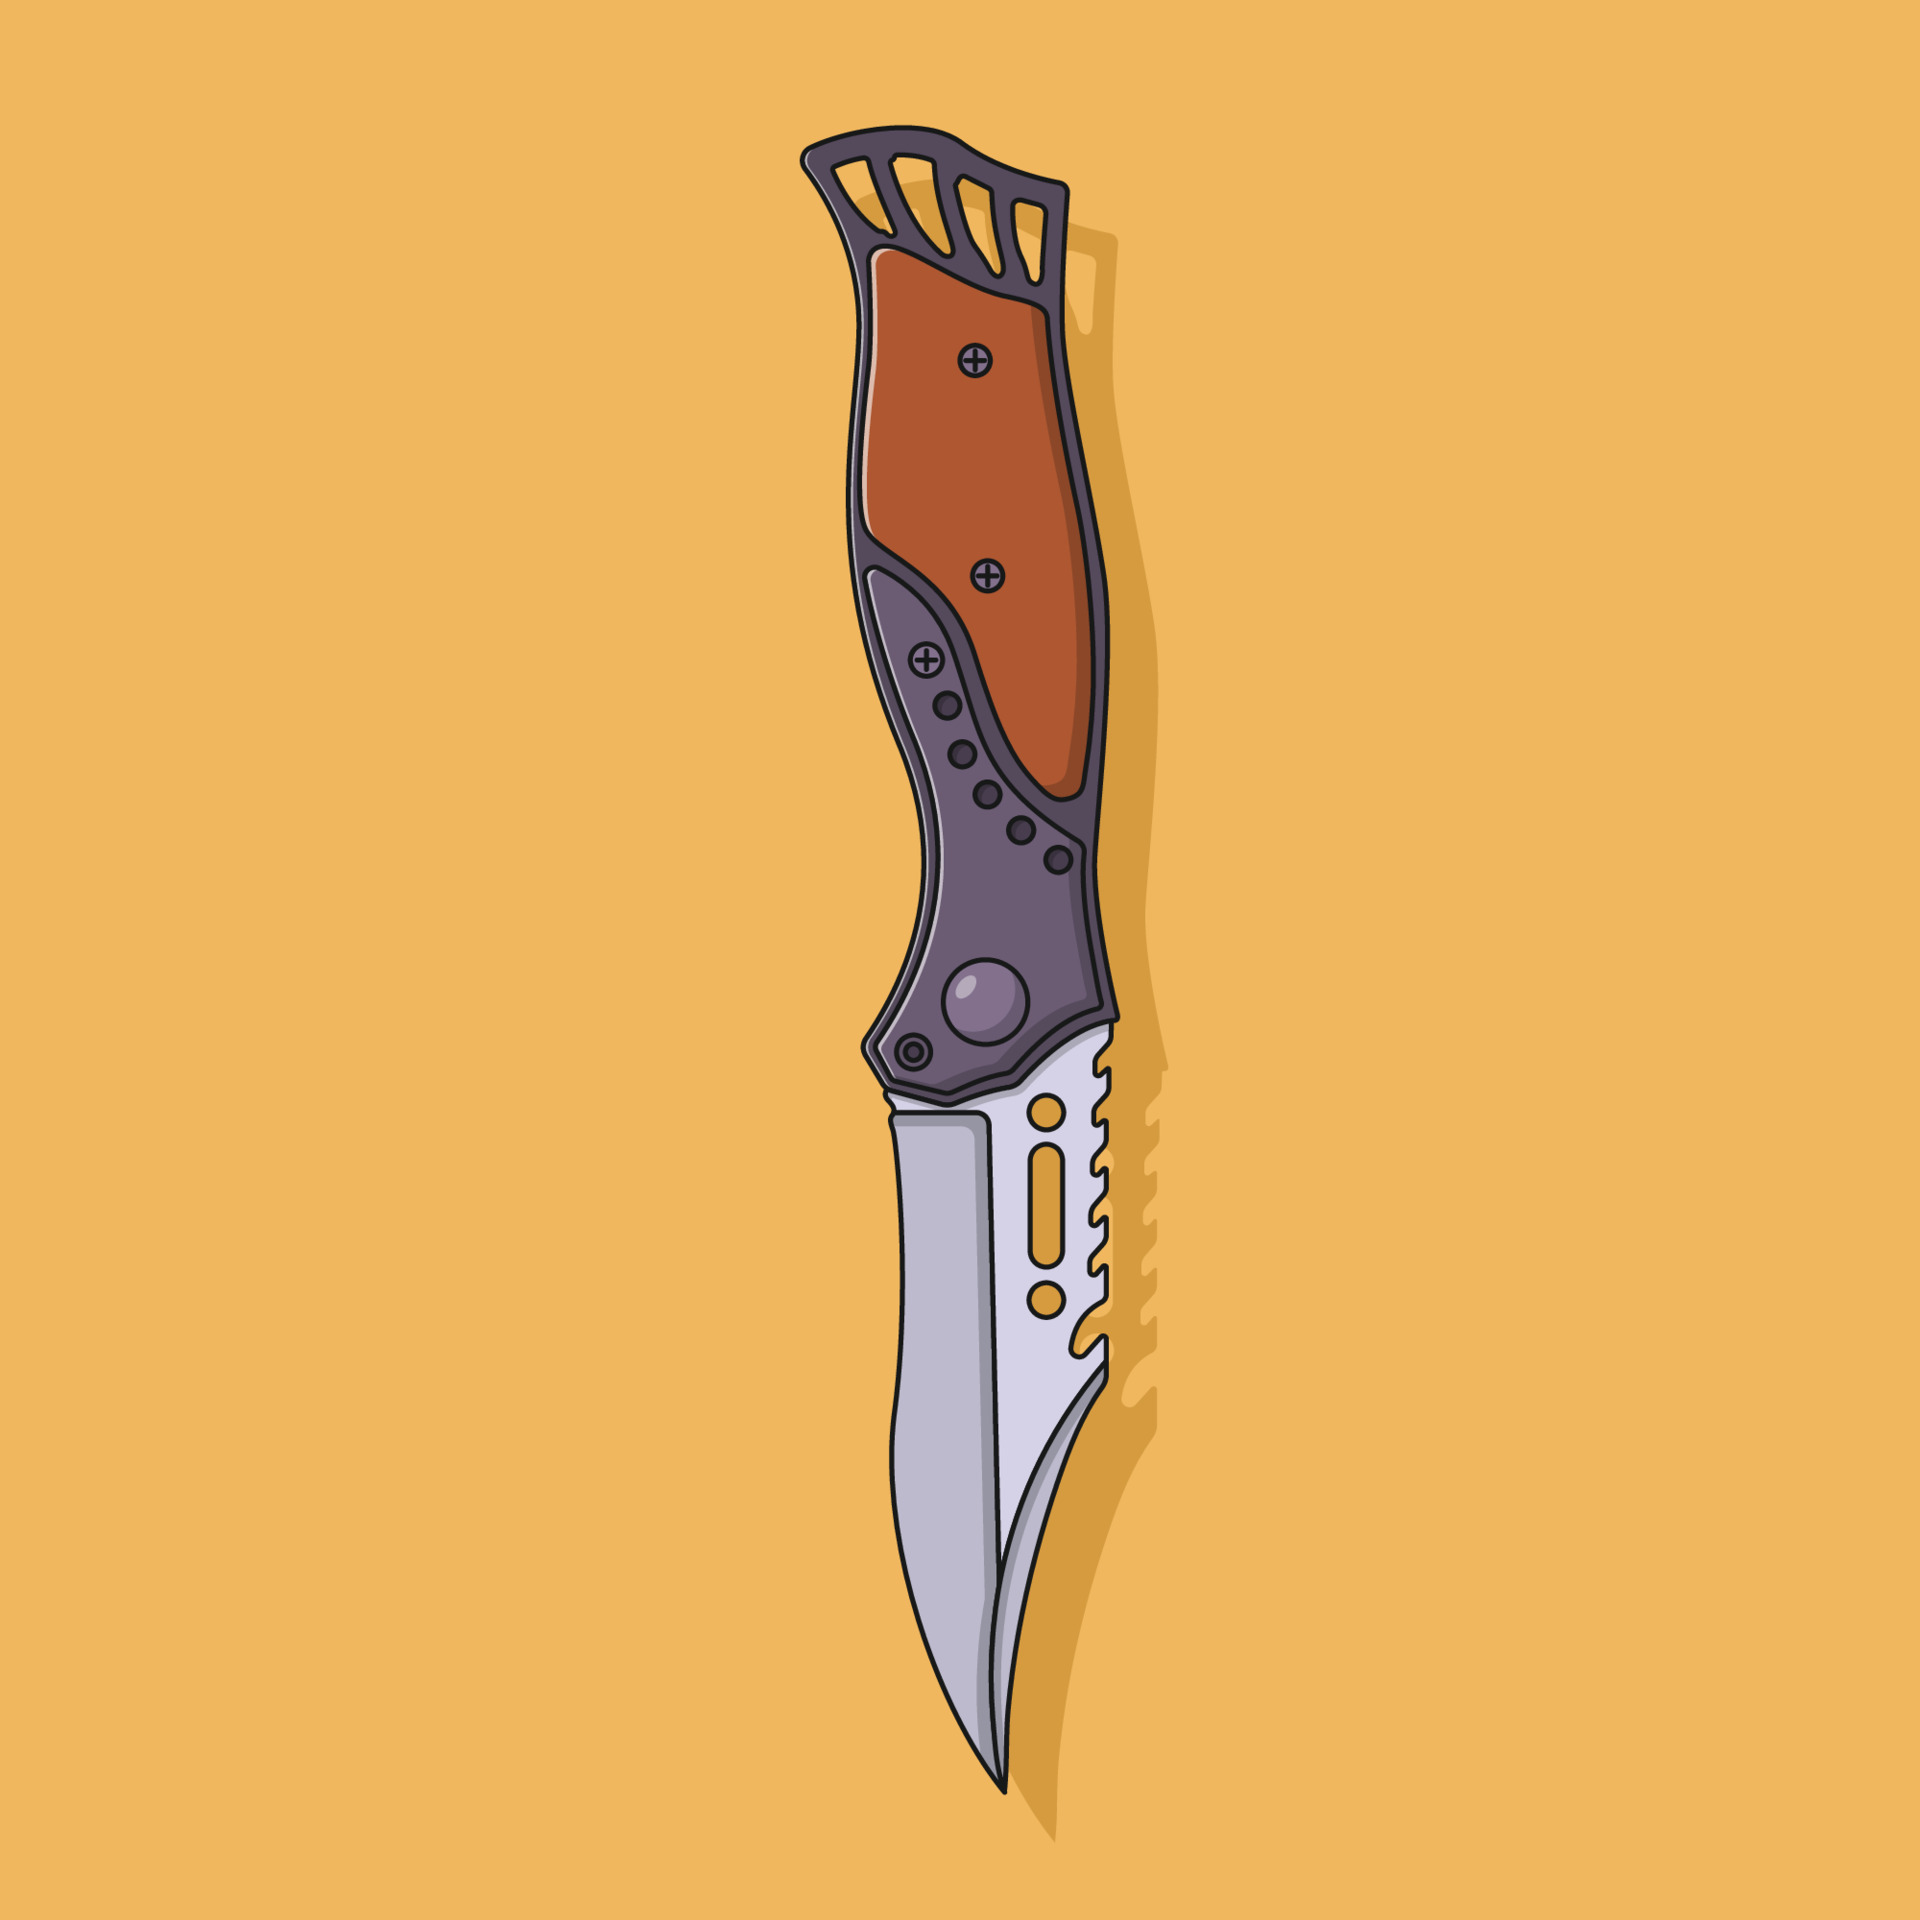 Survival Knife Vector Icon Illustration with Outline for Design